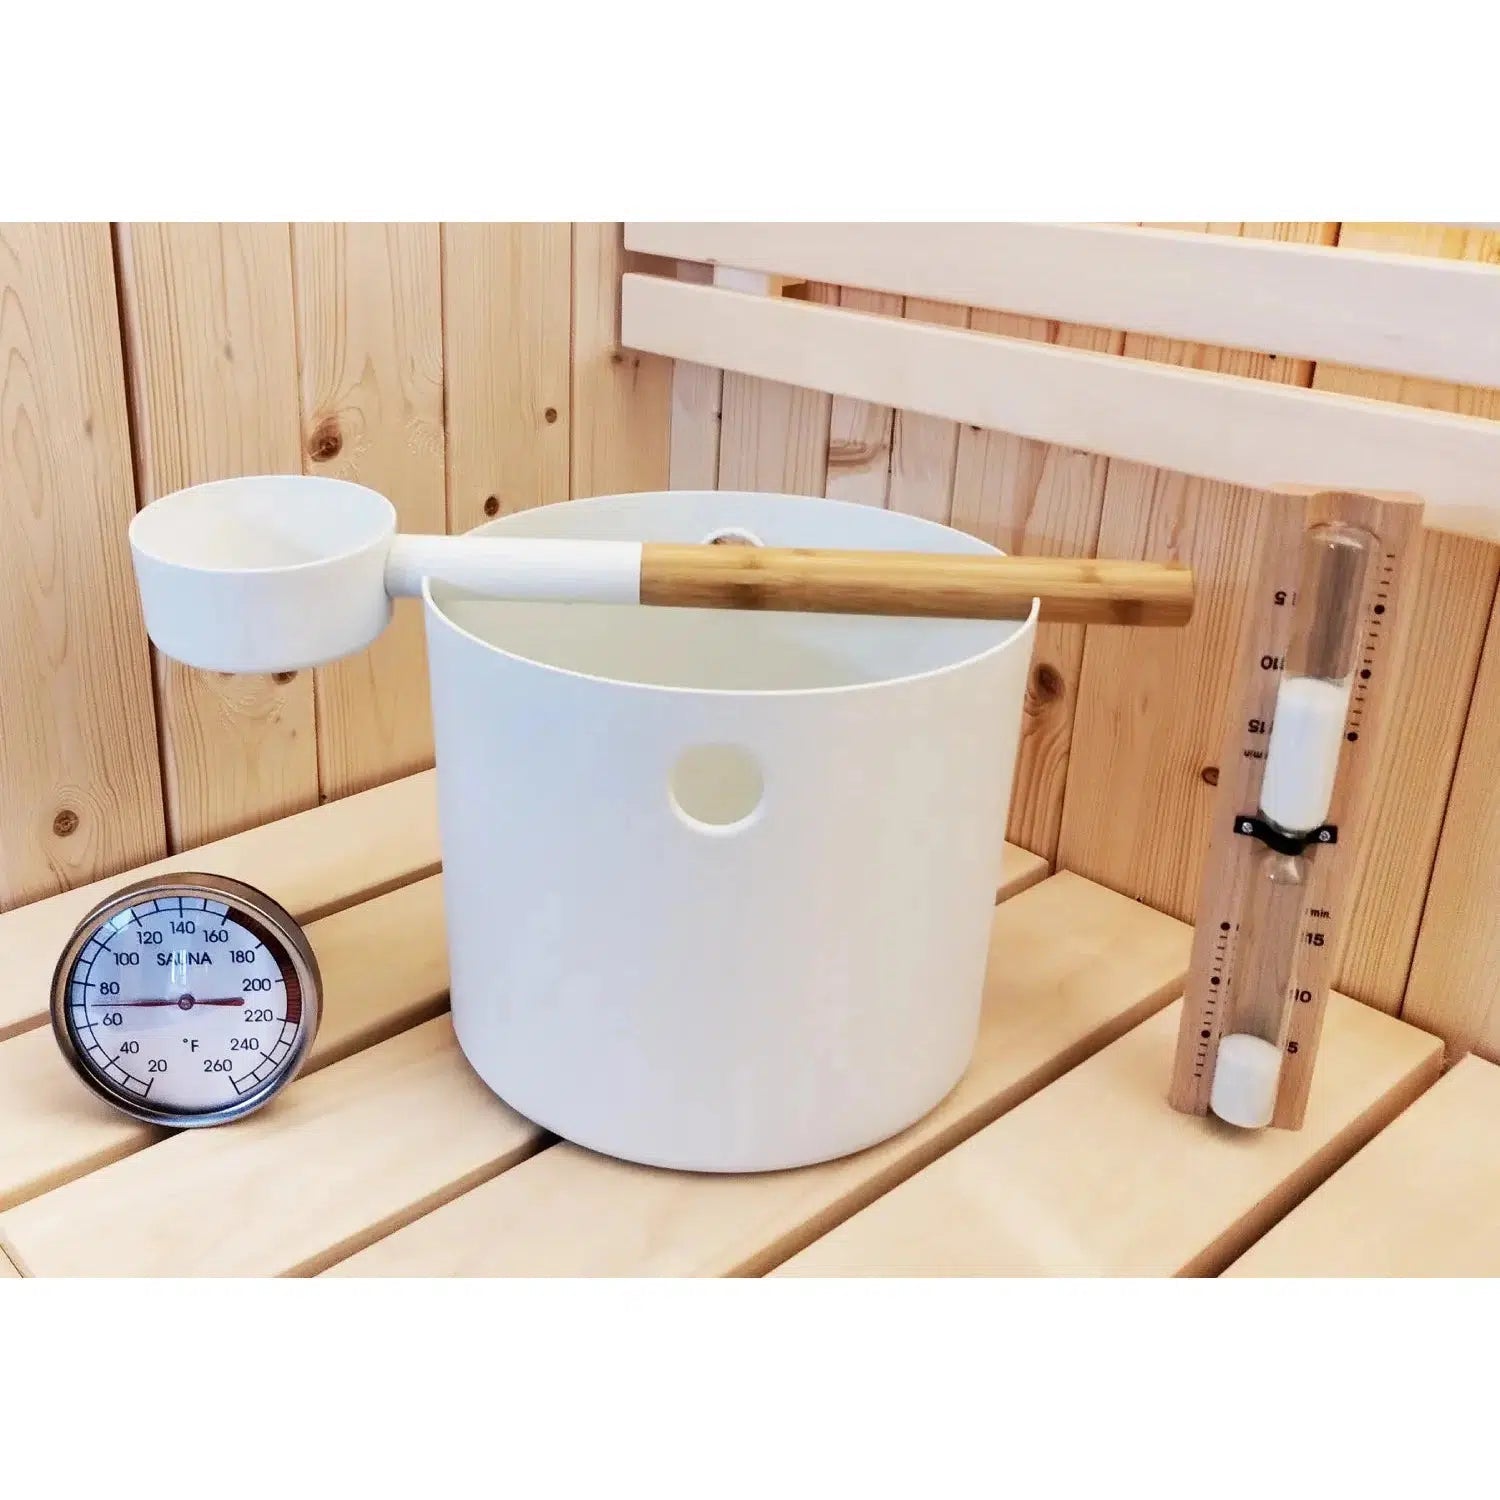 SaunaLife Bucket and Ladle Package 2 Timer, Thermometer w/Premium Bucket & Ladle - Sauna Accessory Package